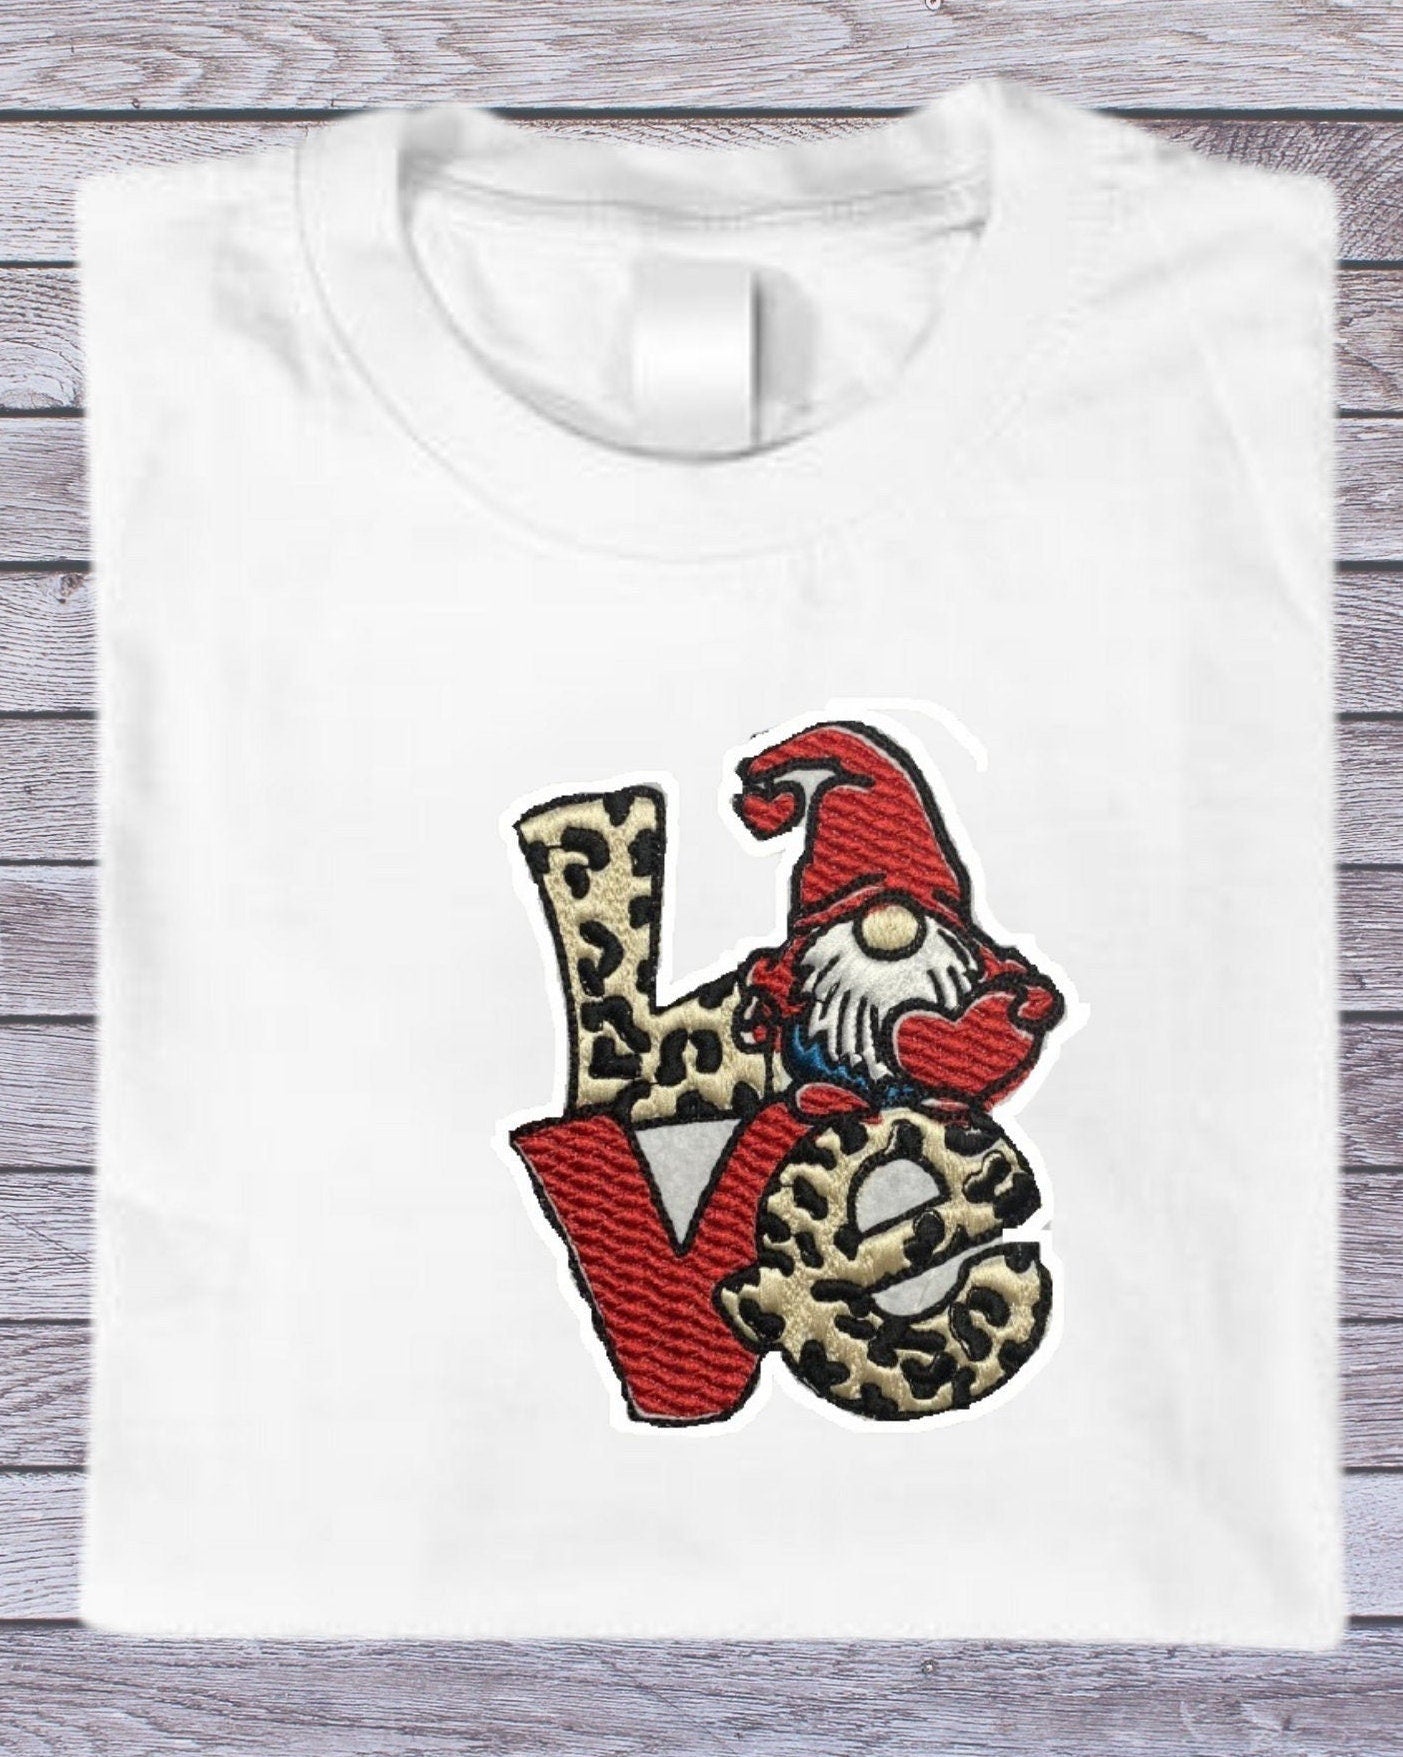 Gnome LOVE t-shirt hoodie sweatshirt  crewneck tshirt embroidered high quality hand made personalised gift detailed design